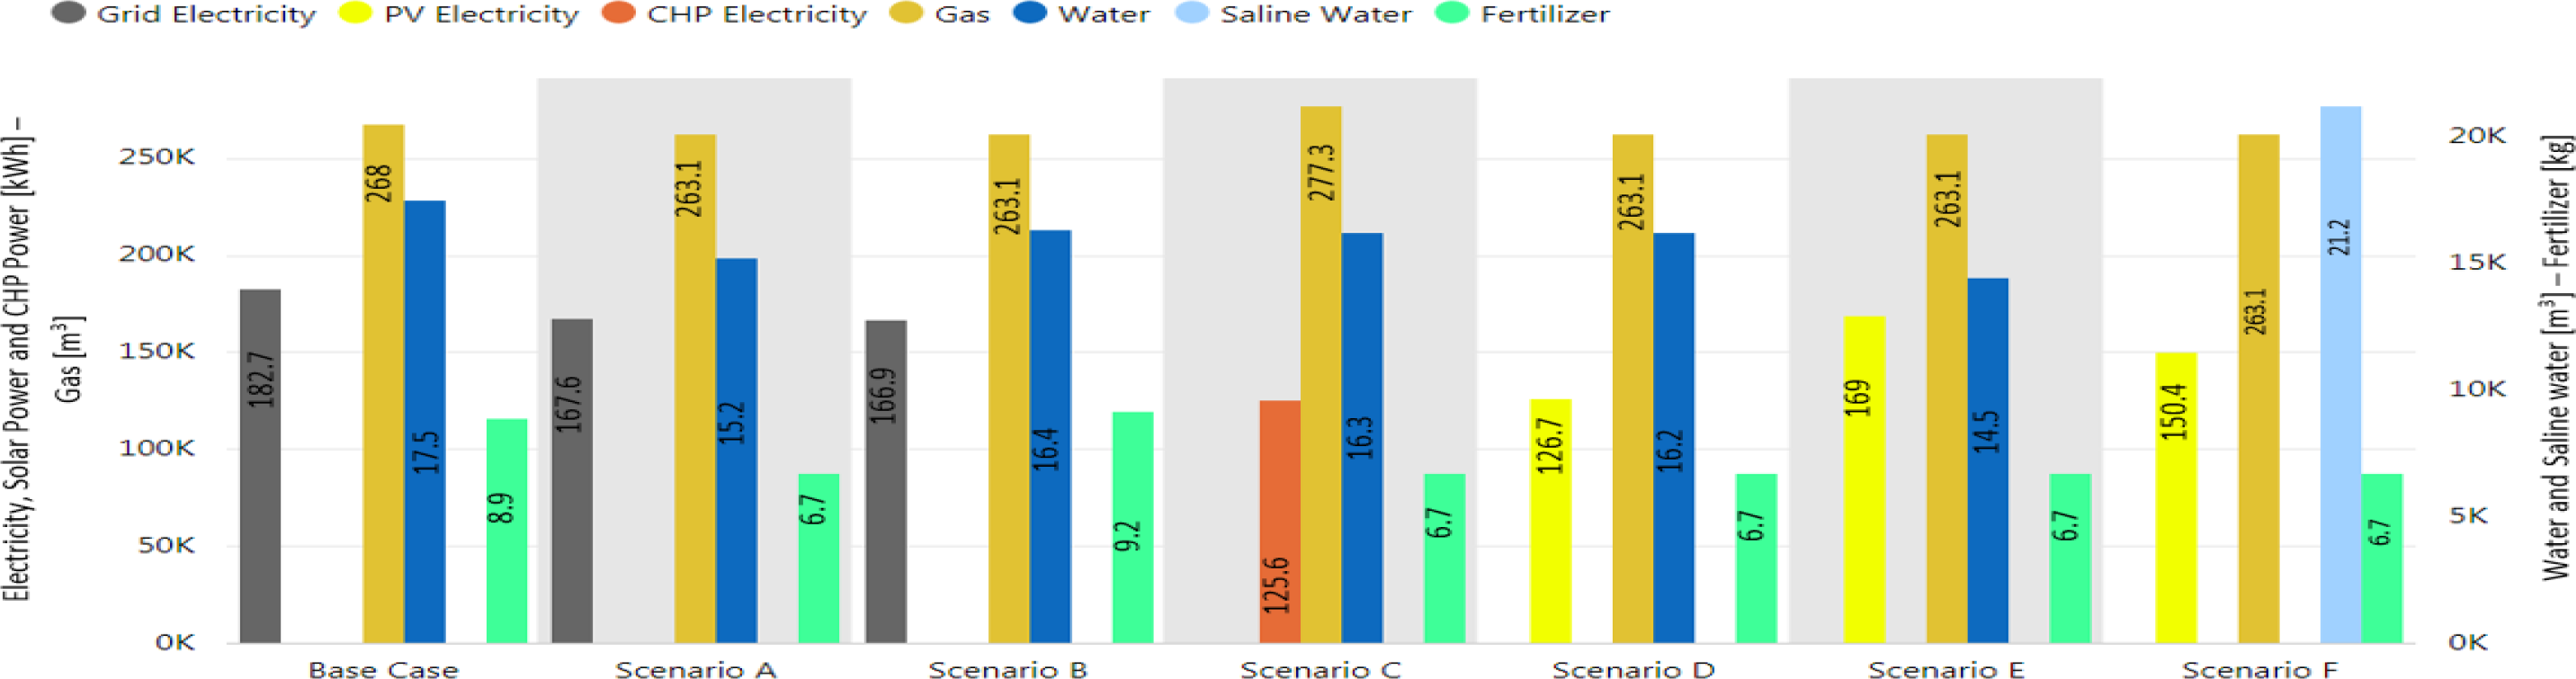 Analysis of Water Conservation Potential in Campus Based on WATERGY